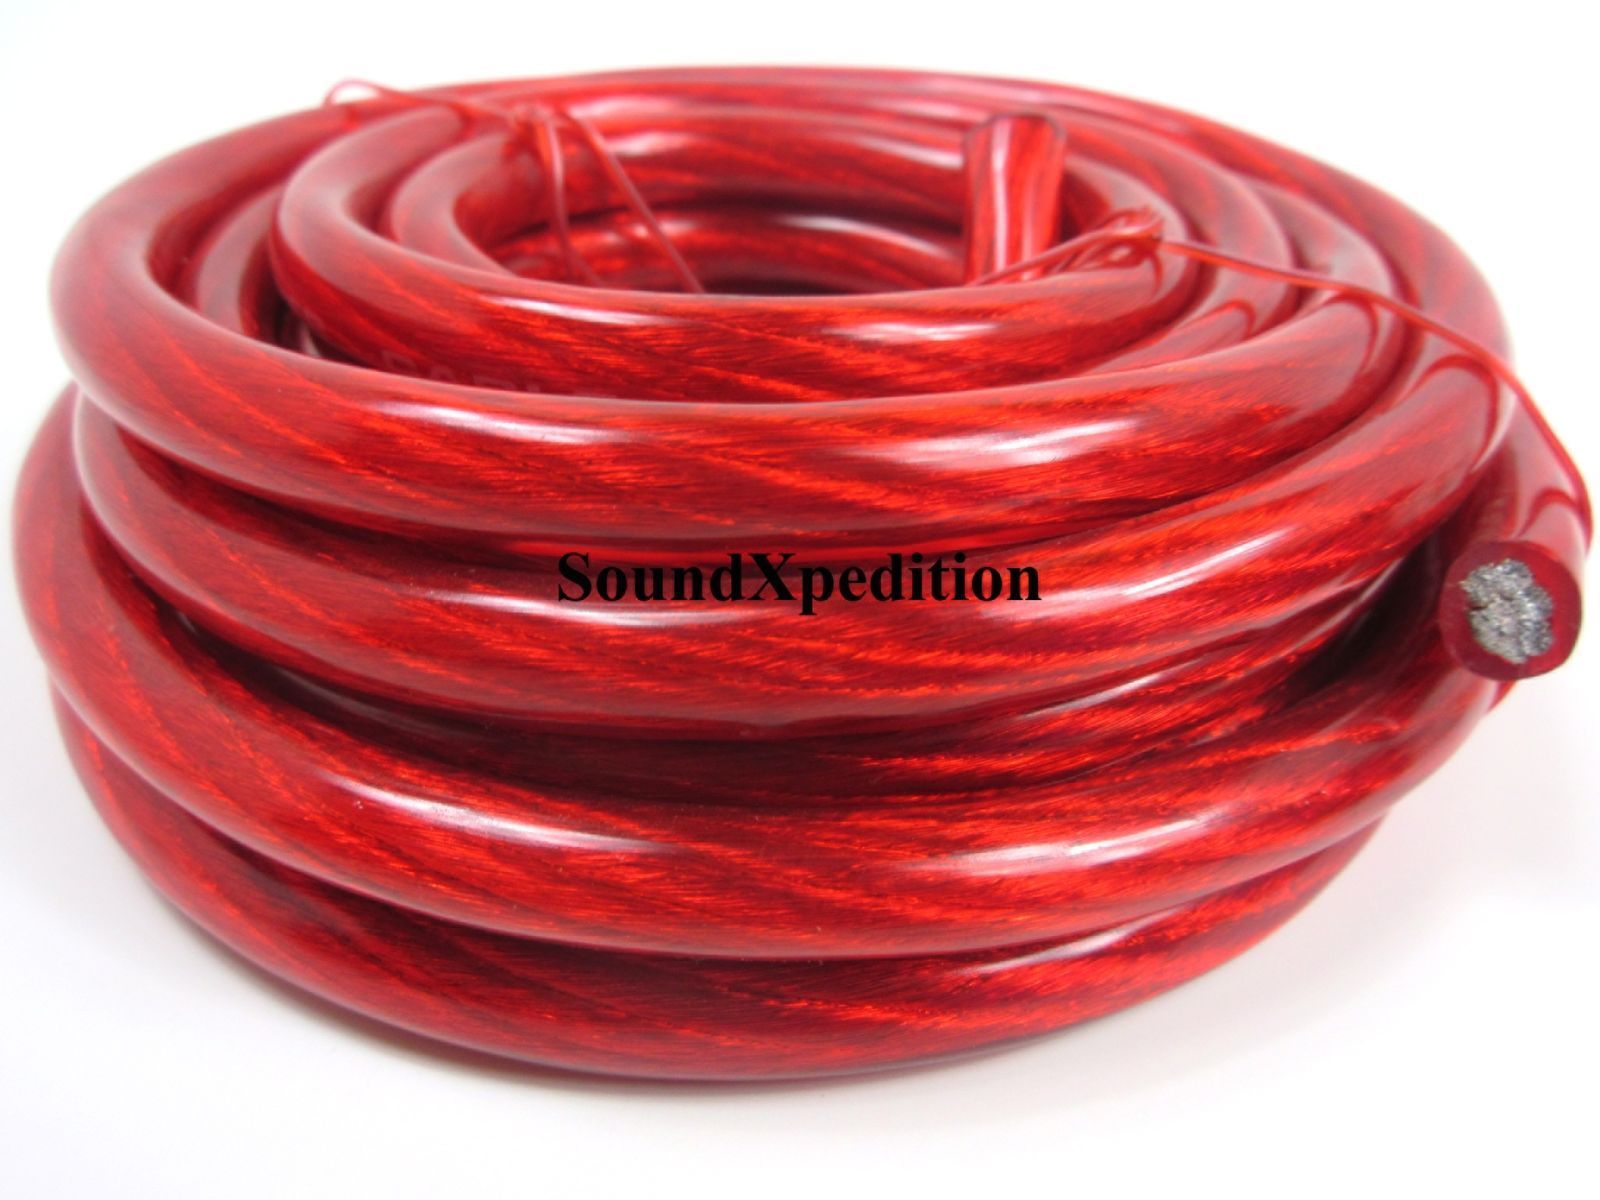 Audiotek 17 FT Feet 4 Gauge Red Power Wire Cable 4awg Car Audio Boat ...